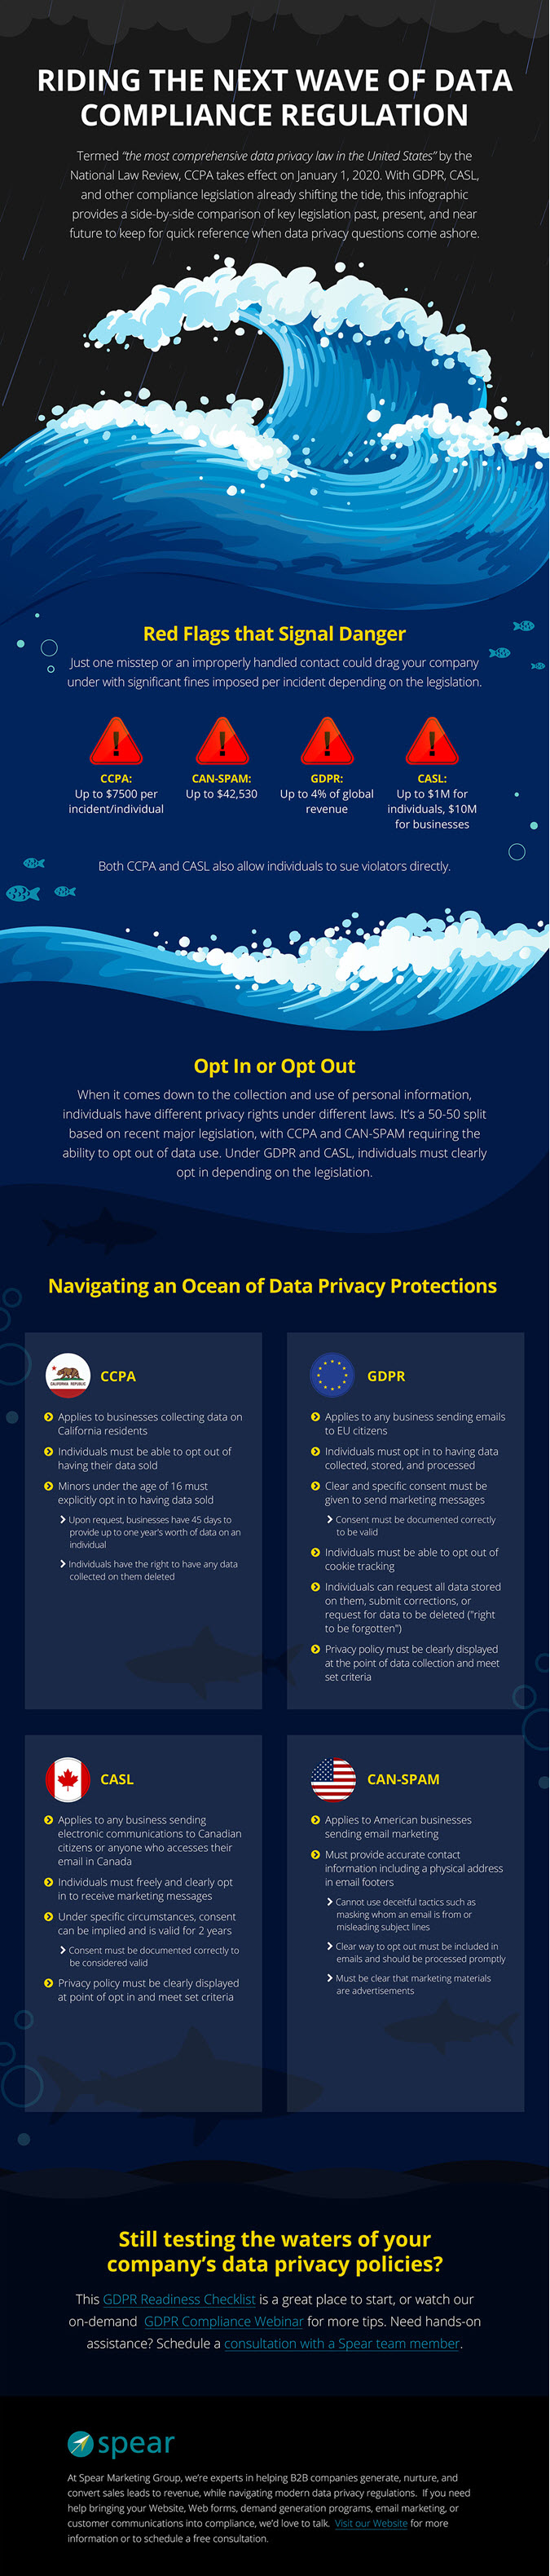 Riding the Next Wave of Data Compliance Regulation